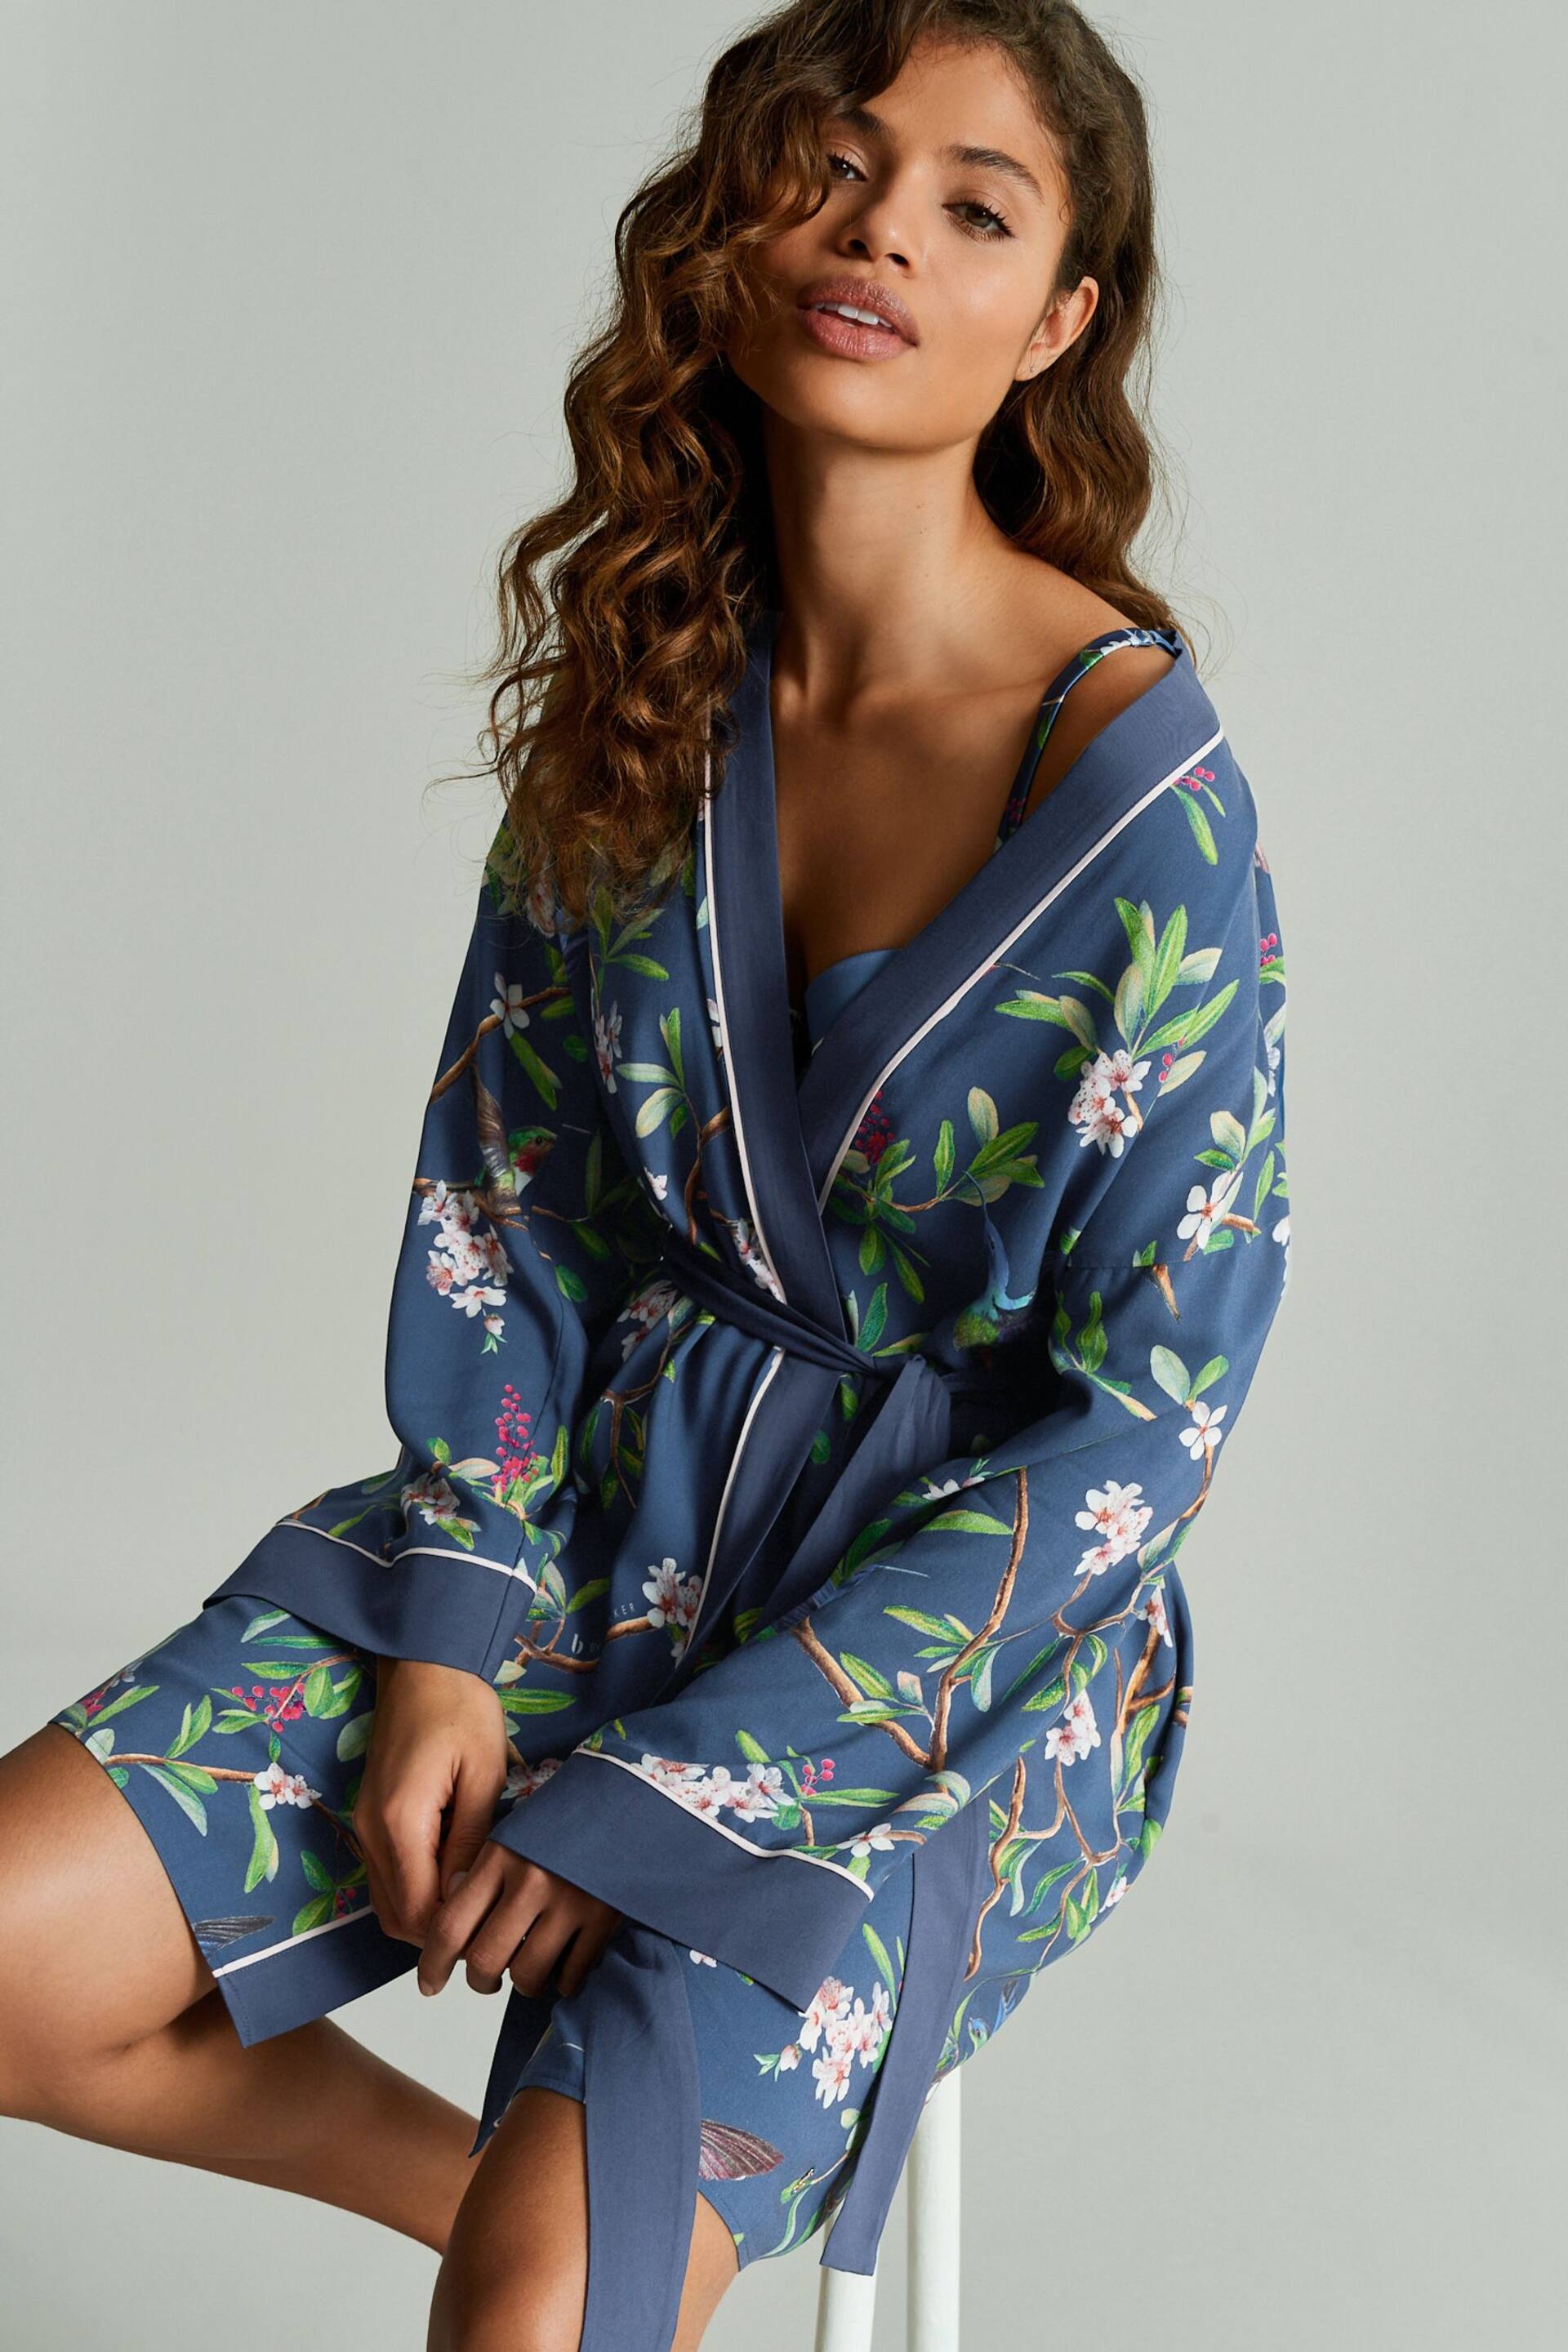 B by Ted Baker Charcoal Navy Bird Viscose Robe - Image 5 of 12